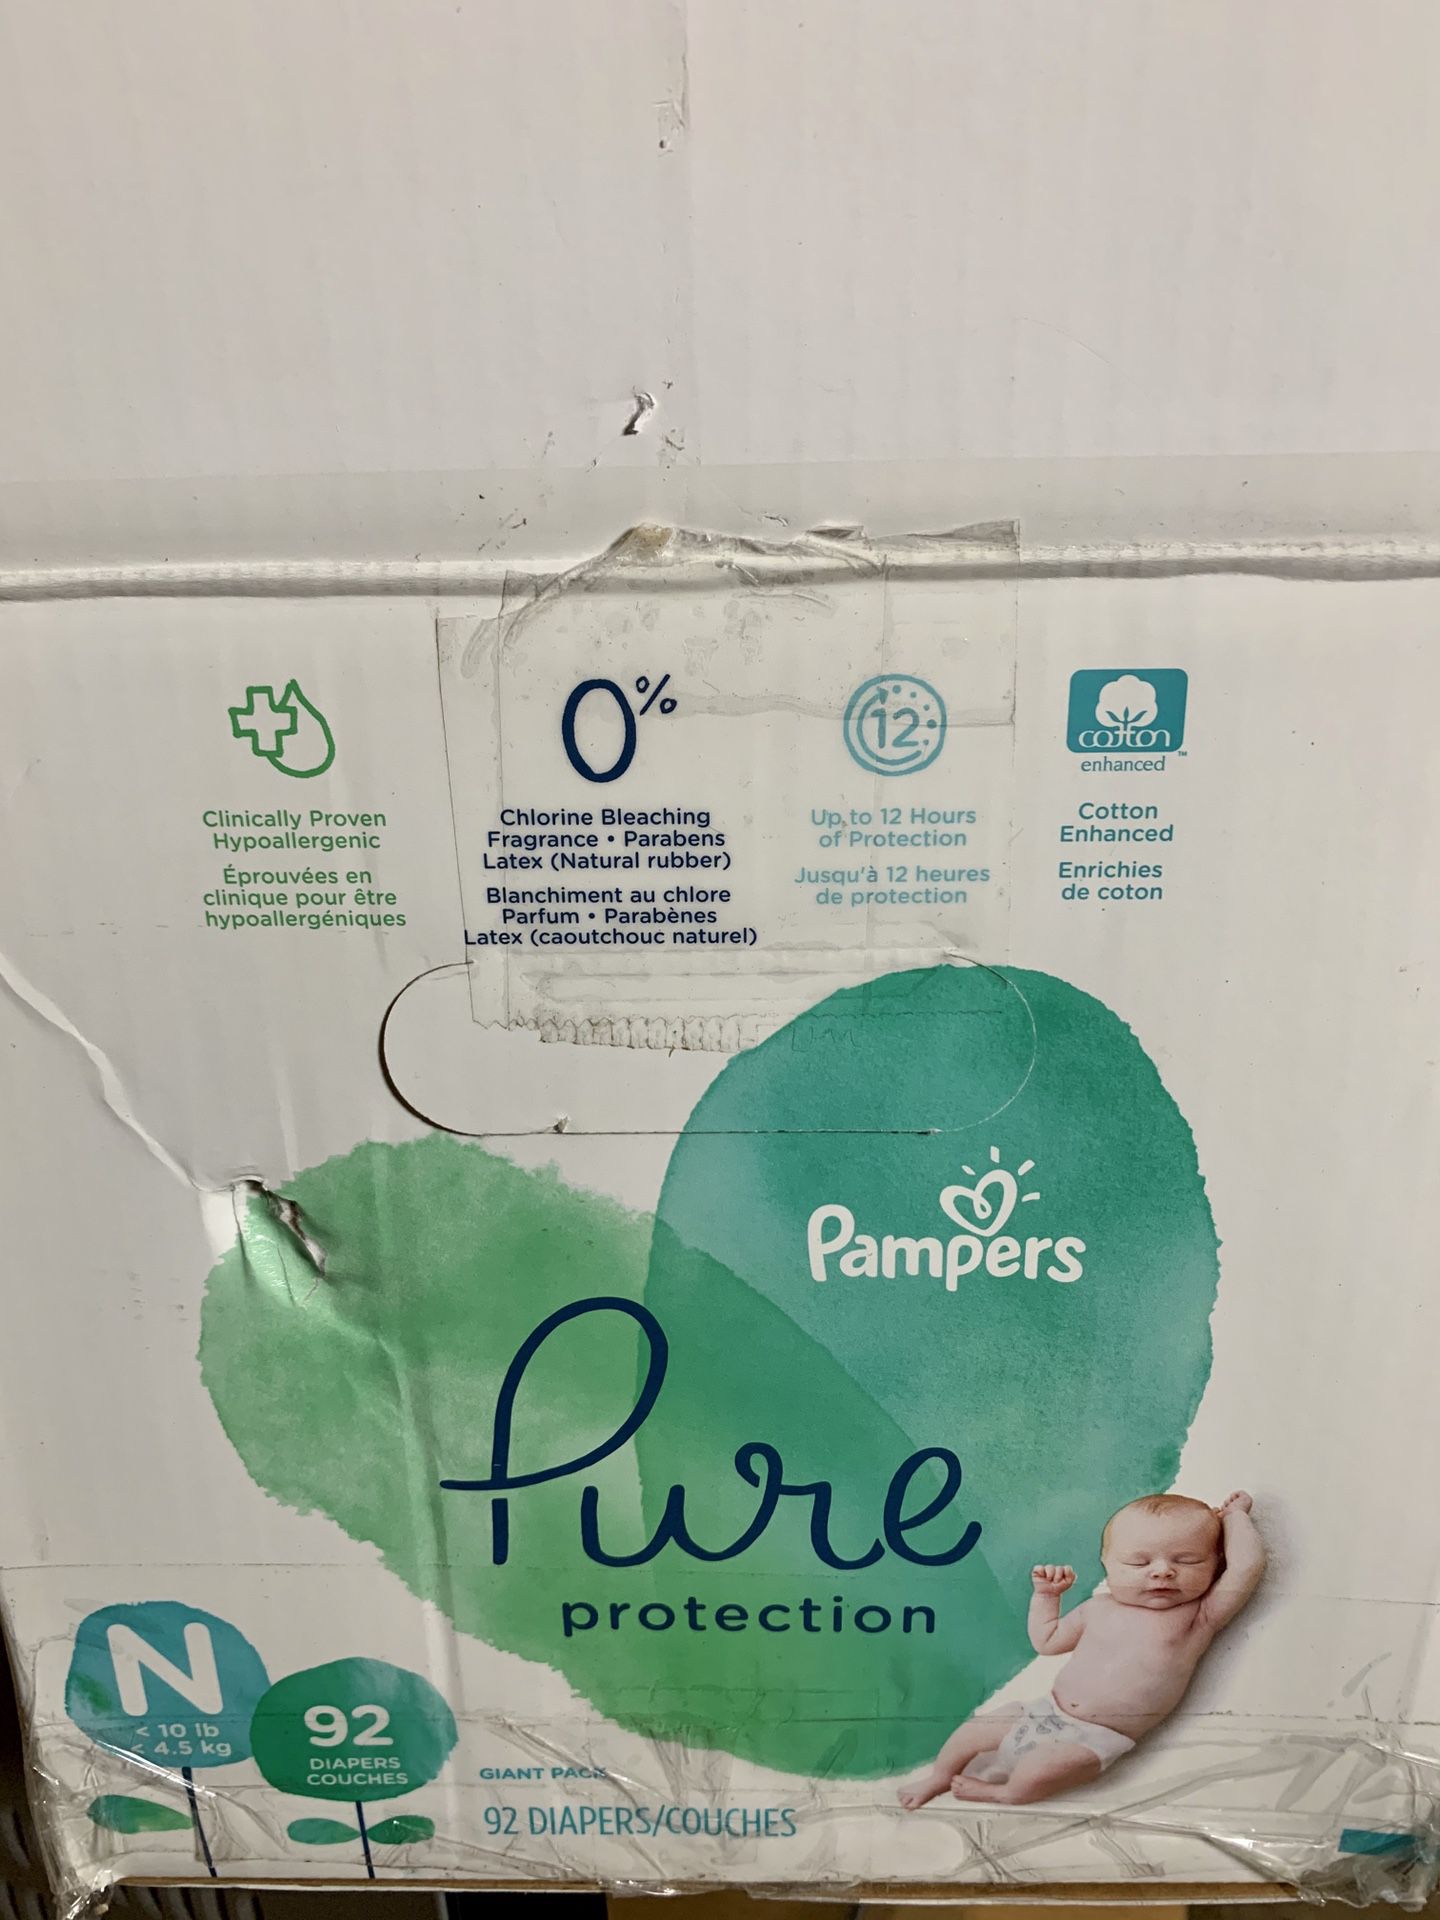 Pure protection Pampers diapers 92 count and baby bottle sterilizer